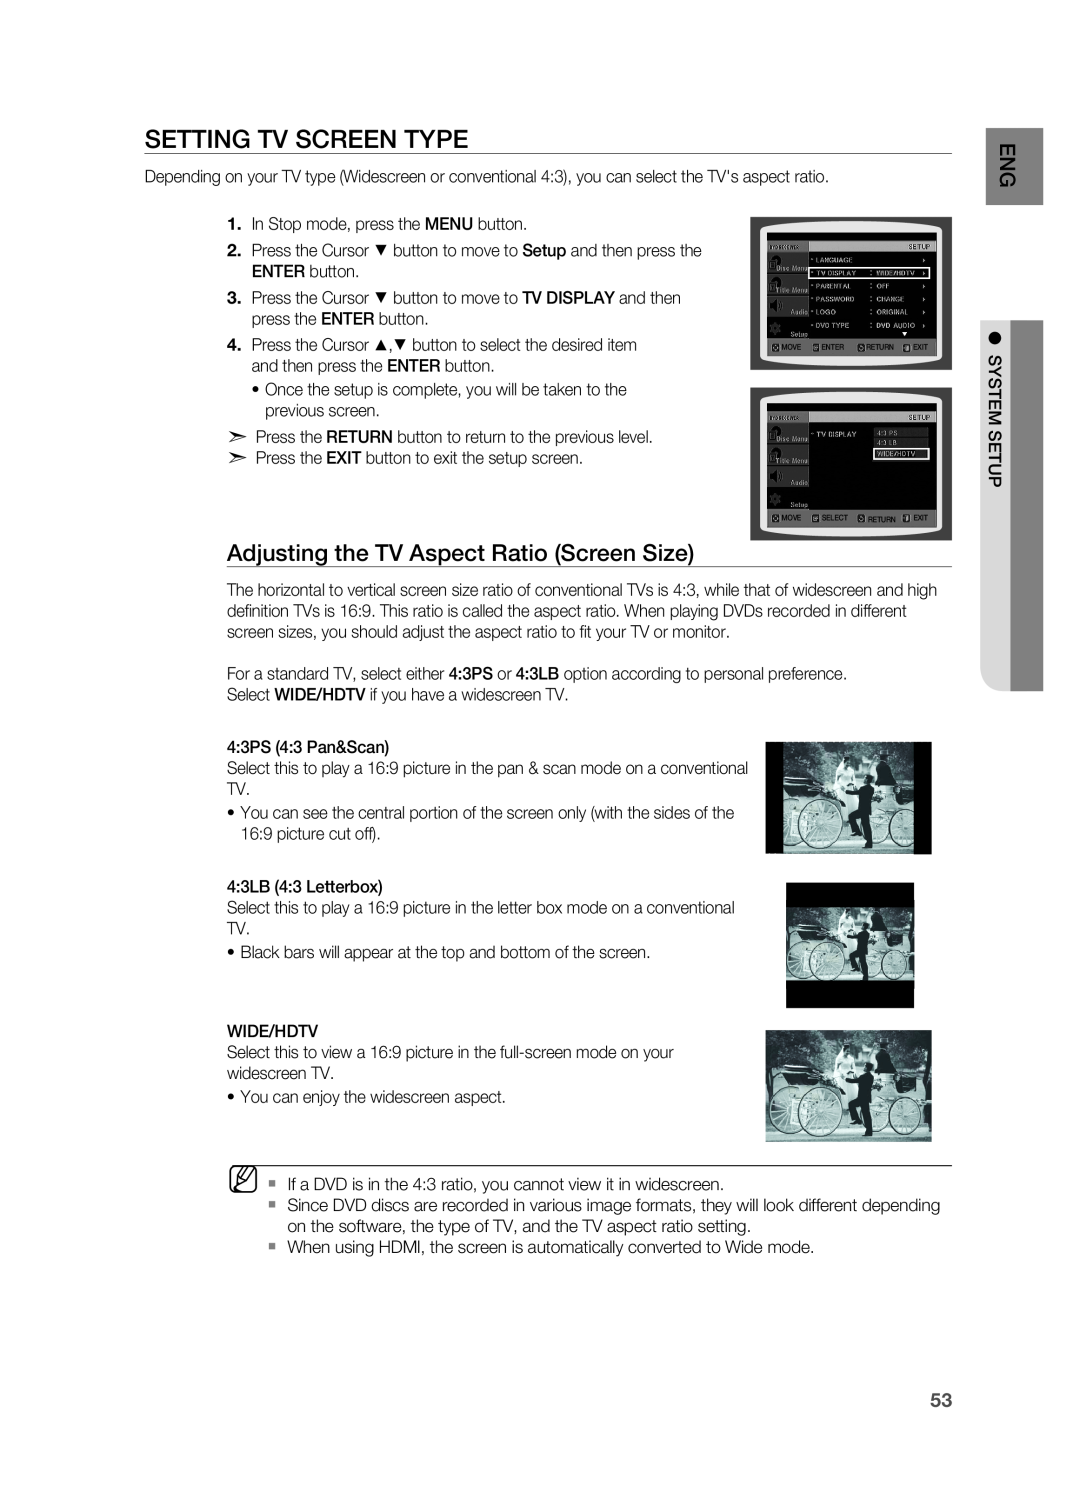 Samsung HT-Z510 manual Setting TV Screen Type, Adjusting the TV Aspect Ratio Screen Size 